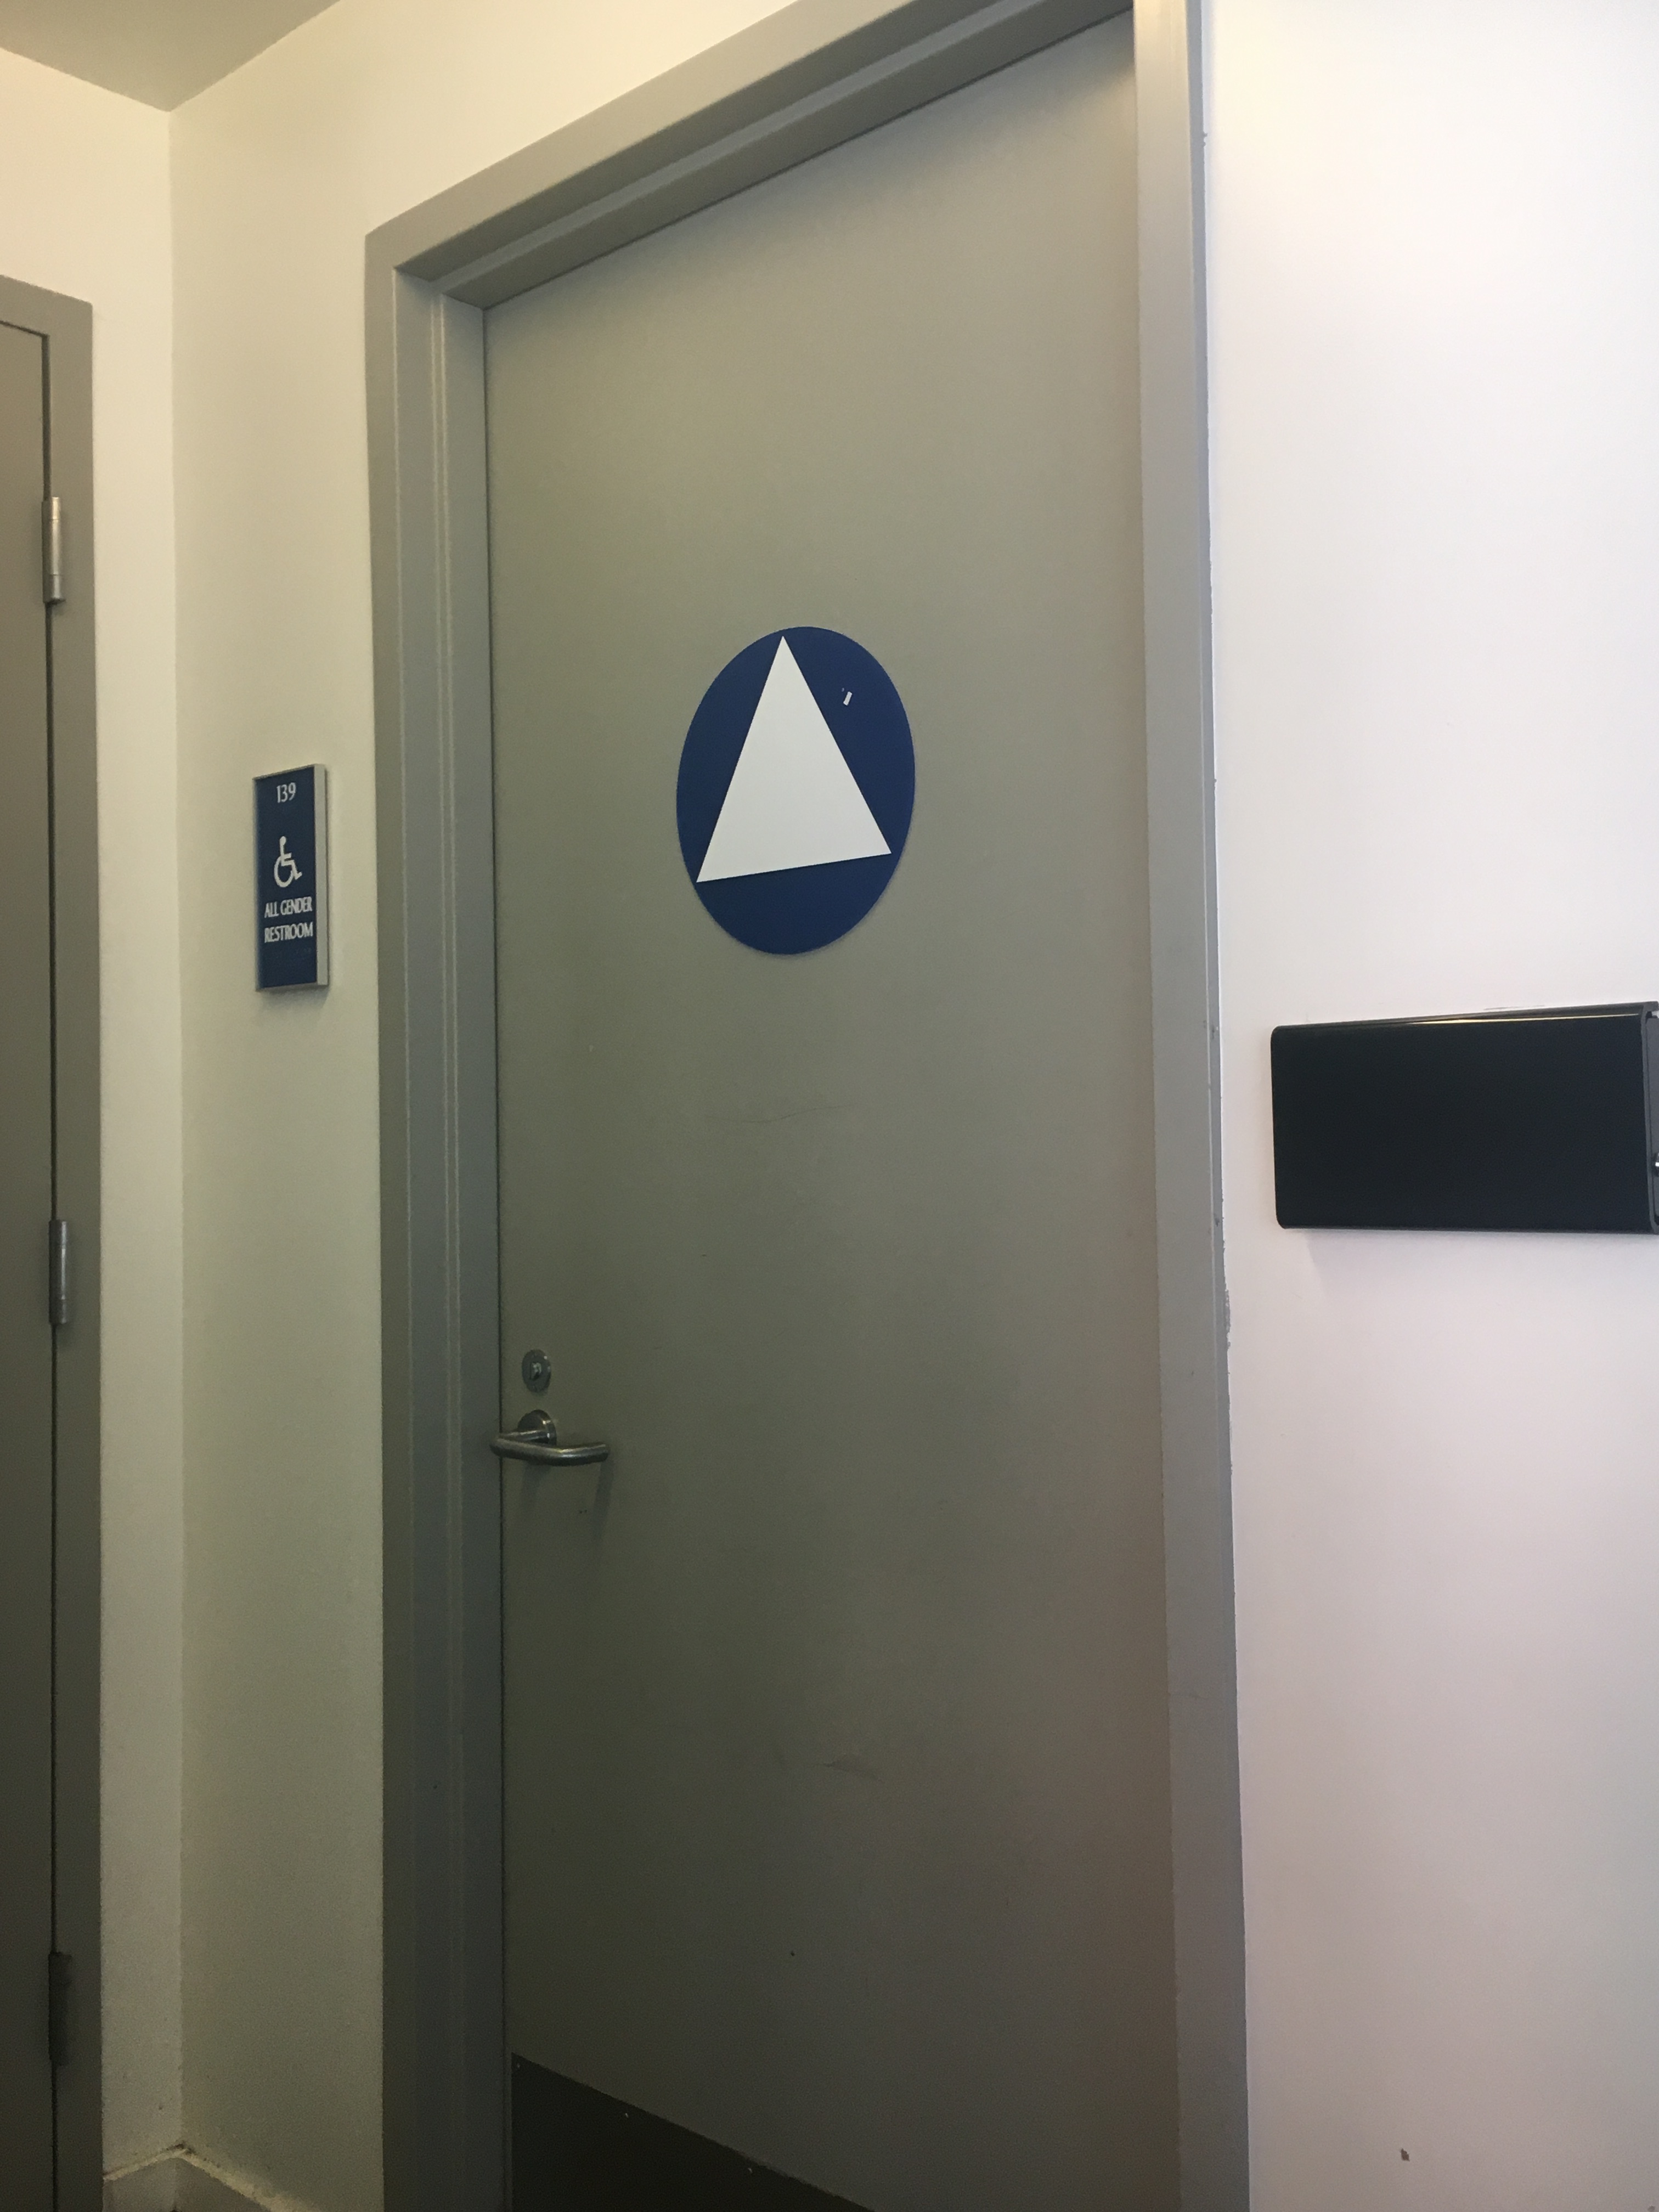 The blue circle with the white triangle indicates companion/ all-gender bathroom